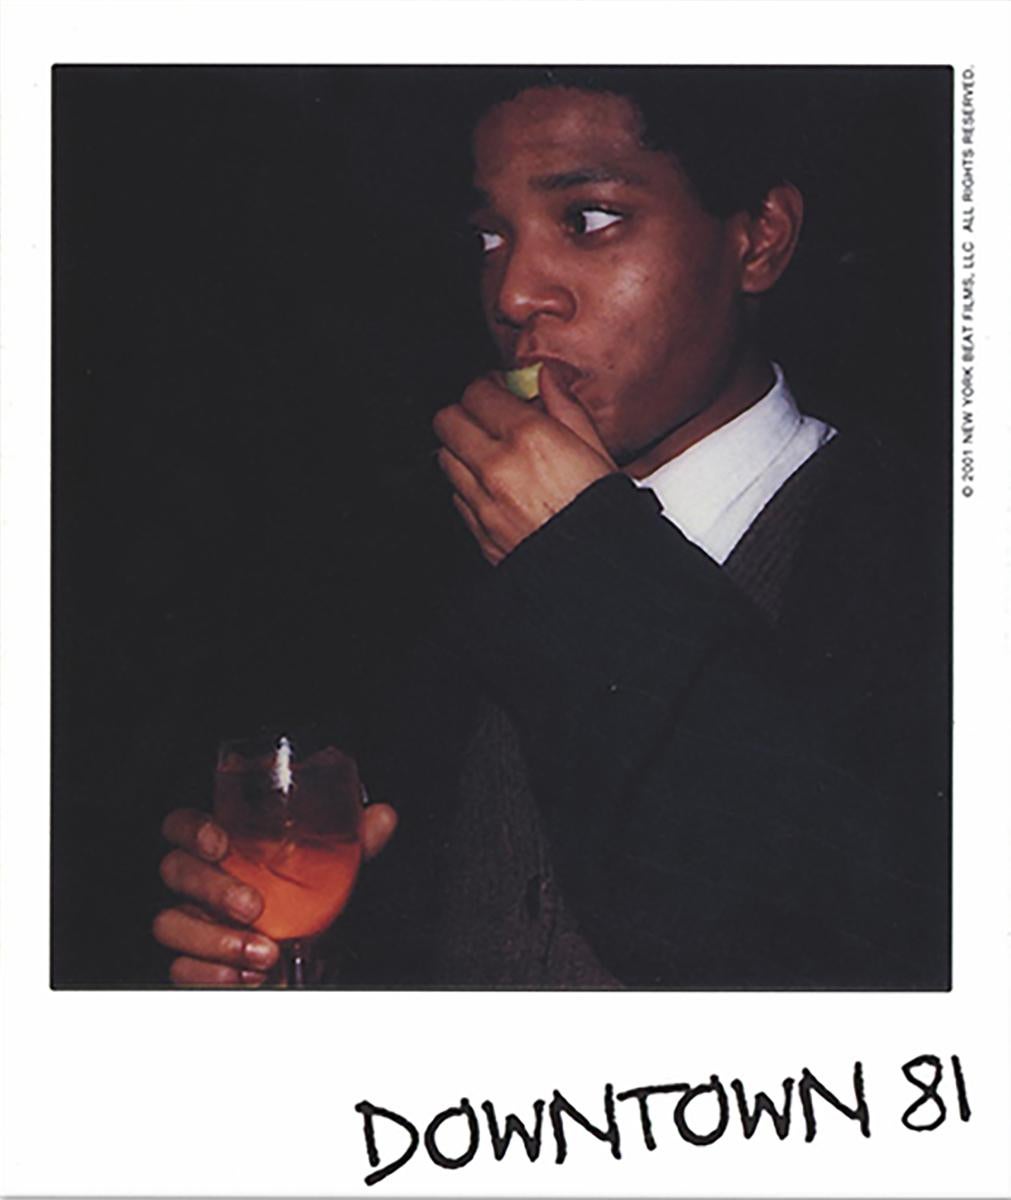 Collection Basquiat Downtown 81 (Basquiat, 1981 : The Studio of the Street) 